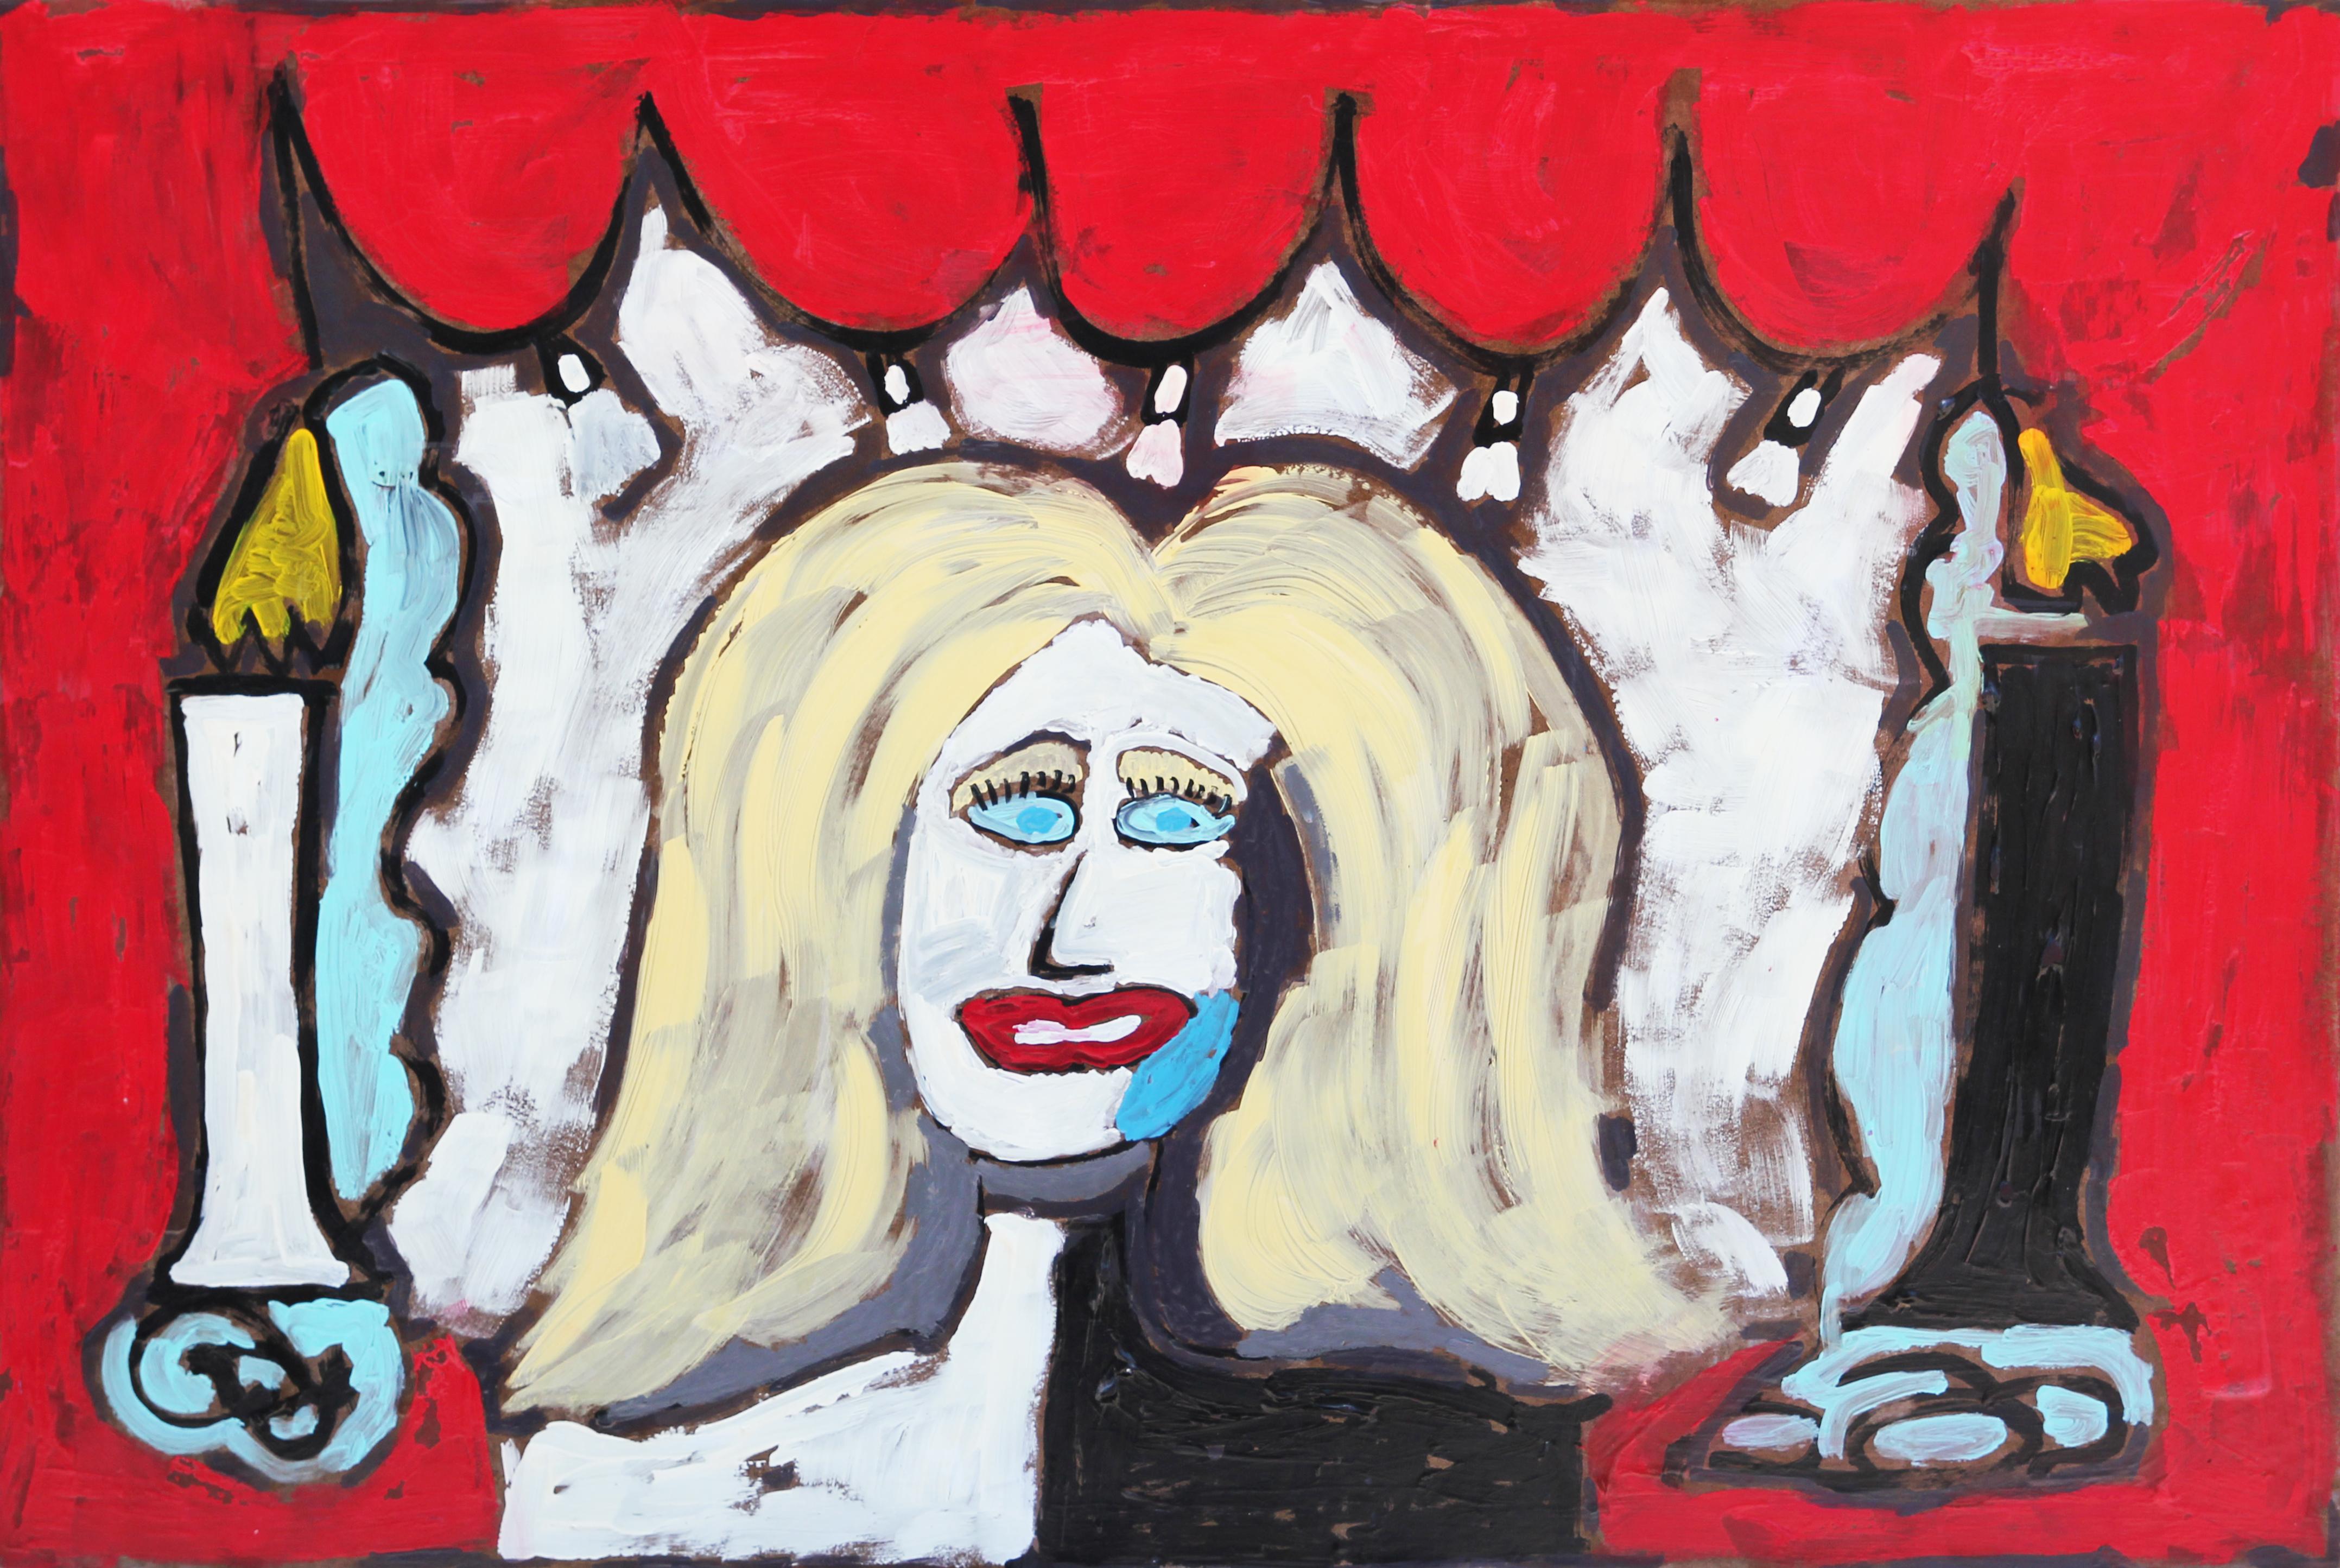 Paul Reeves Abstract Painting - "Hollywood" Blonde Woman Behind a Stage with Red Curtains and Two Candles